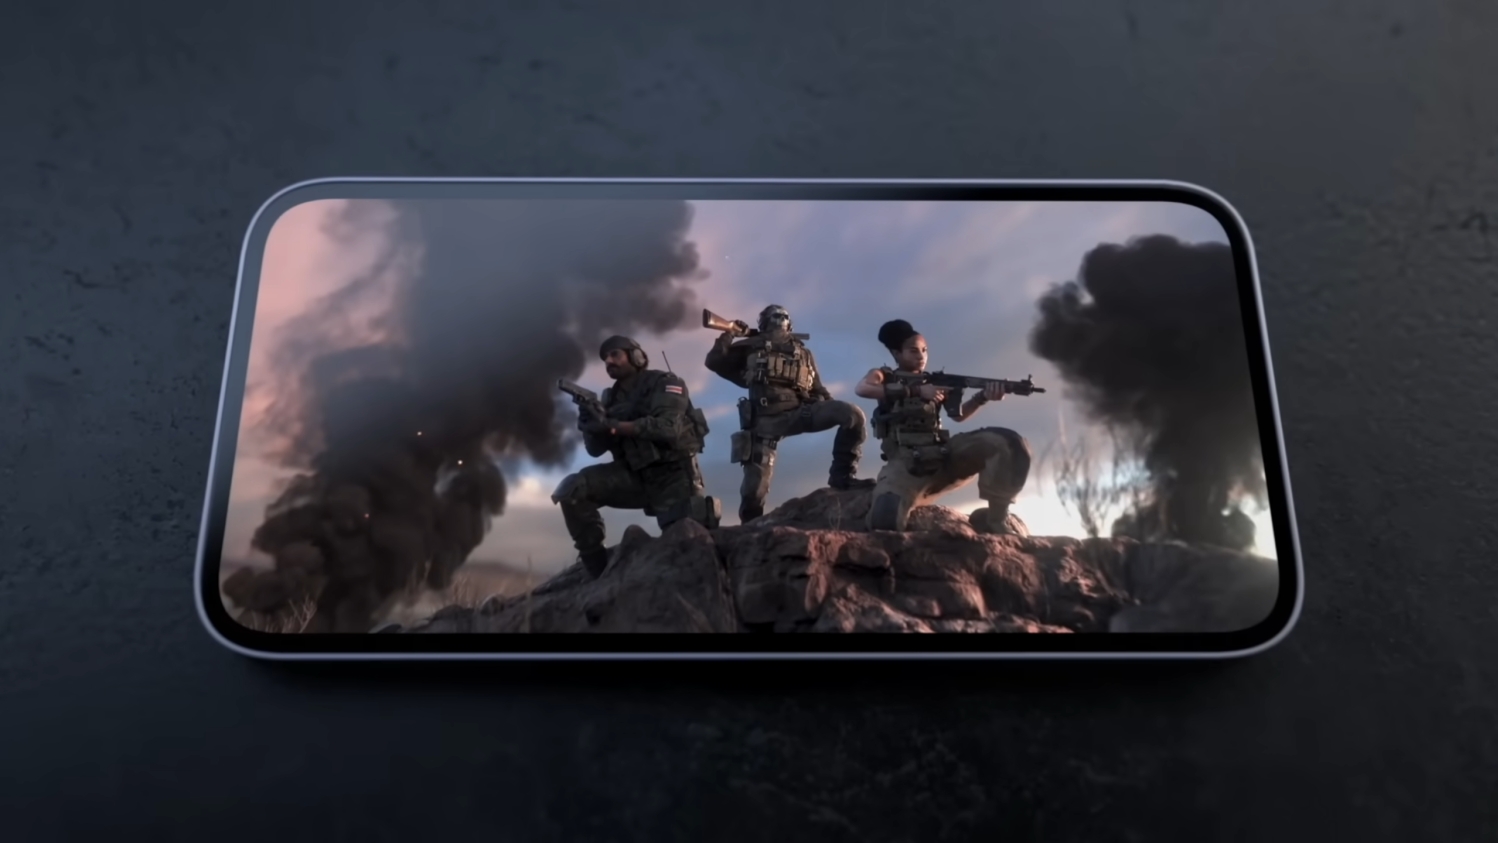 PS5 quality games will eventually be playable natively on phones,  Activision CEO says